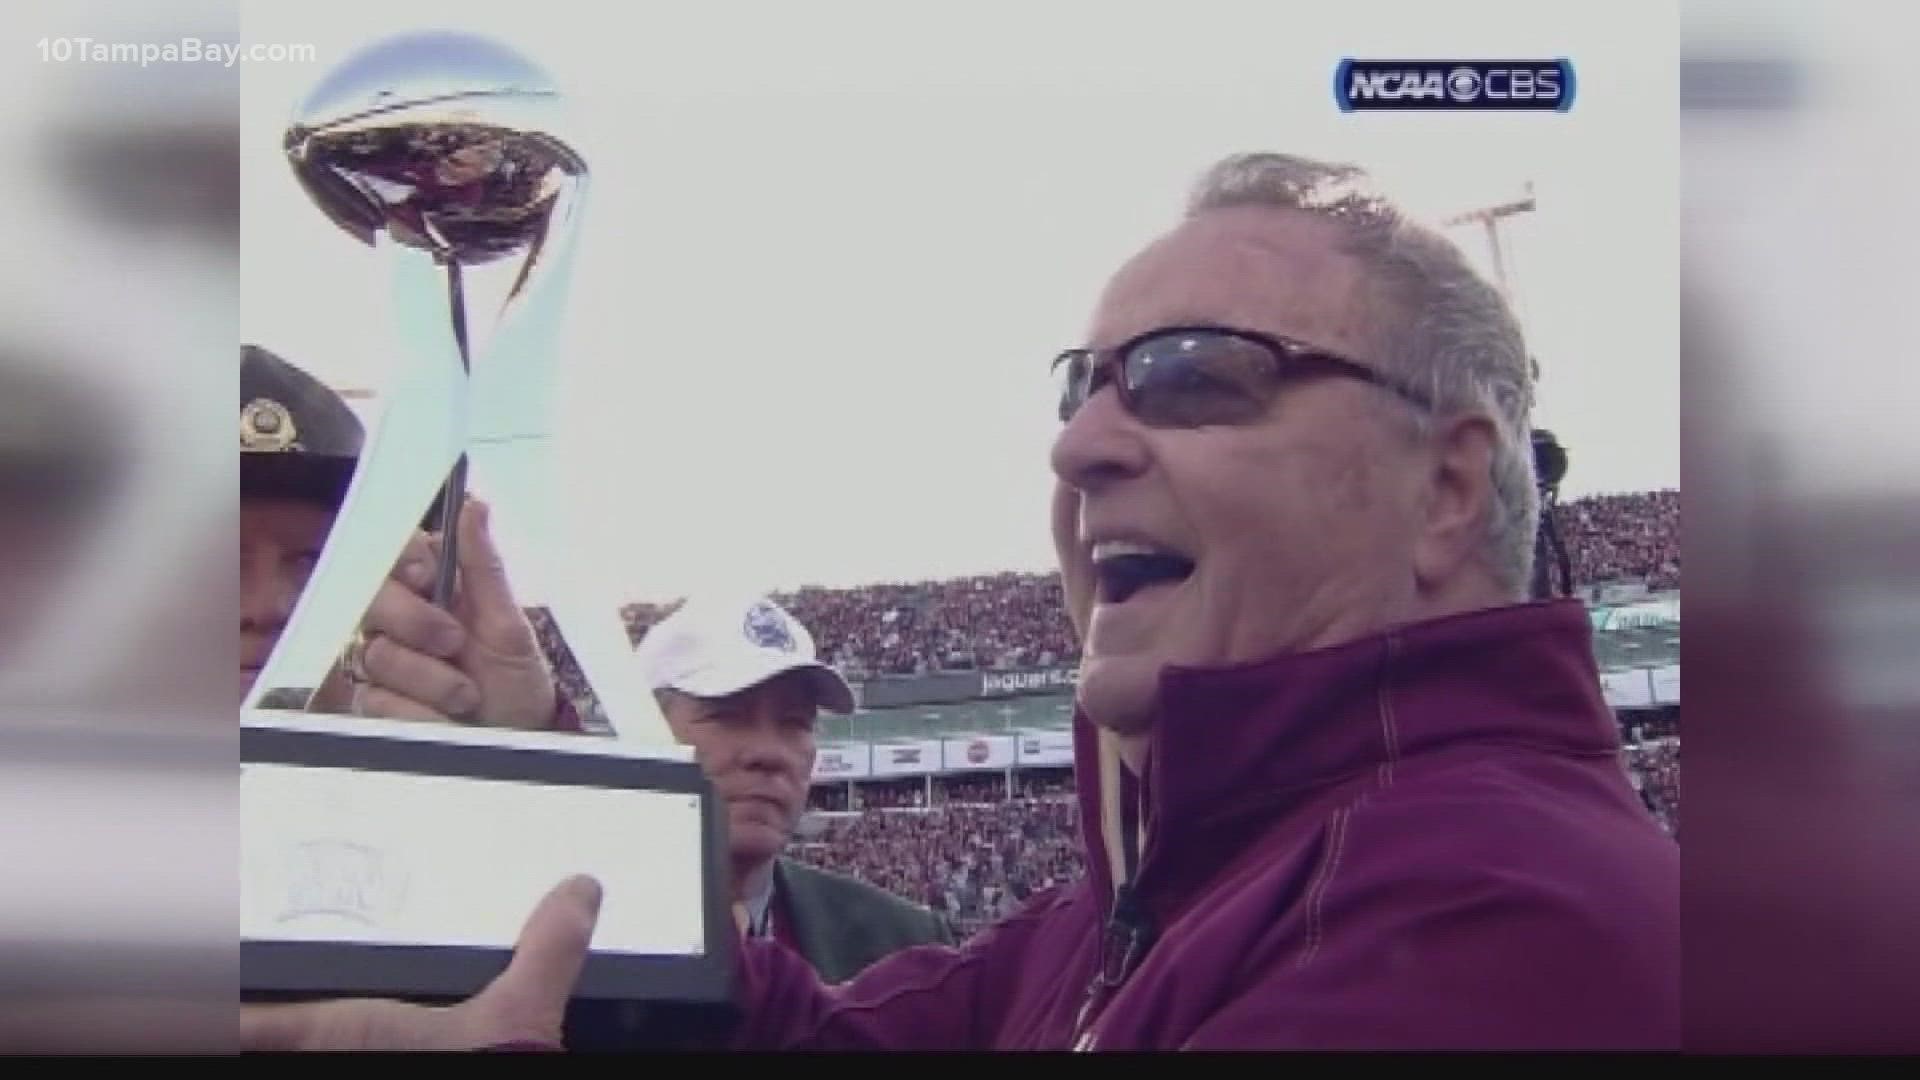 The legendary football coach led the Seminoles to two national championships during his 34 years with the team.